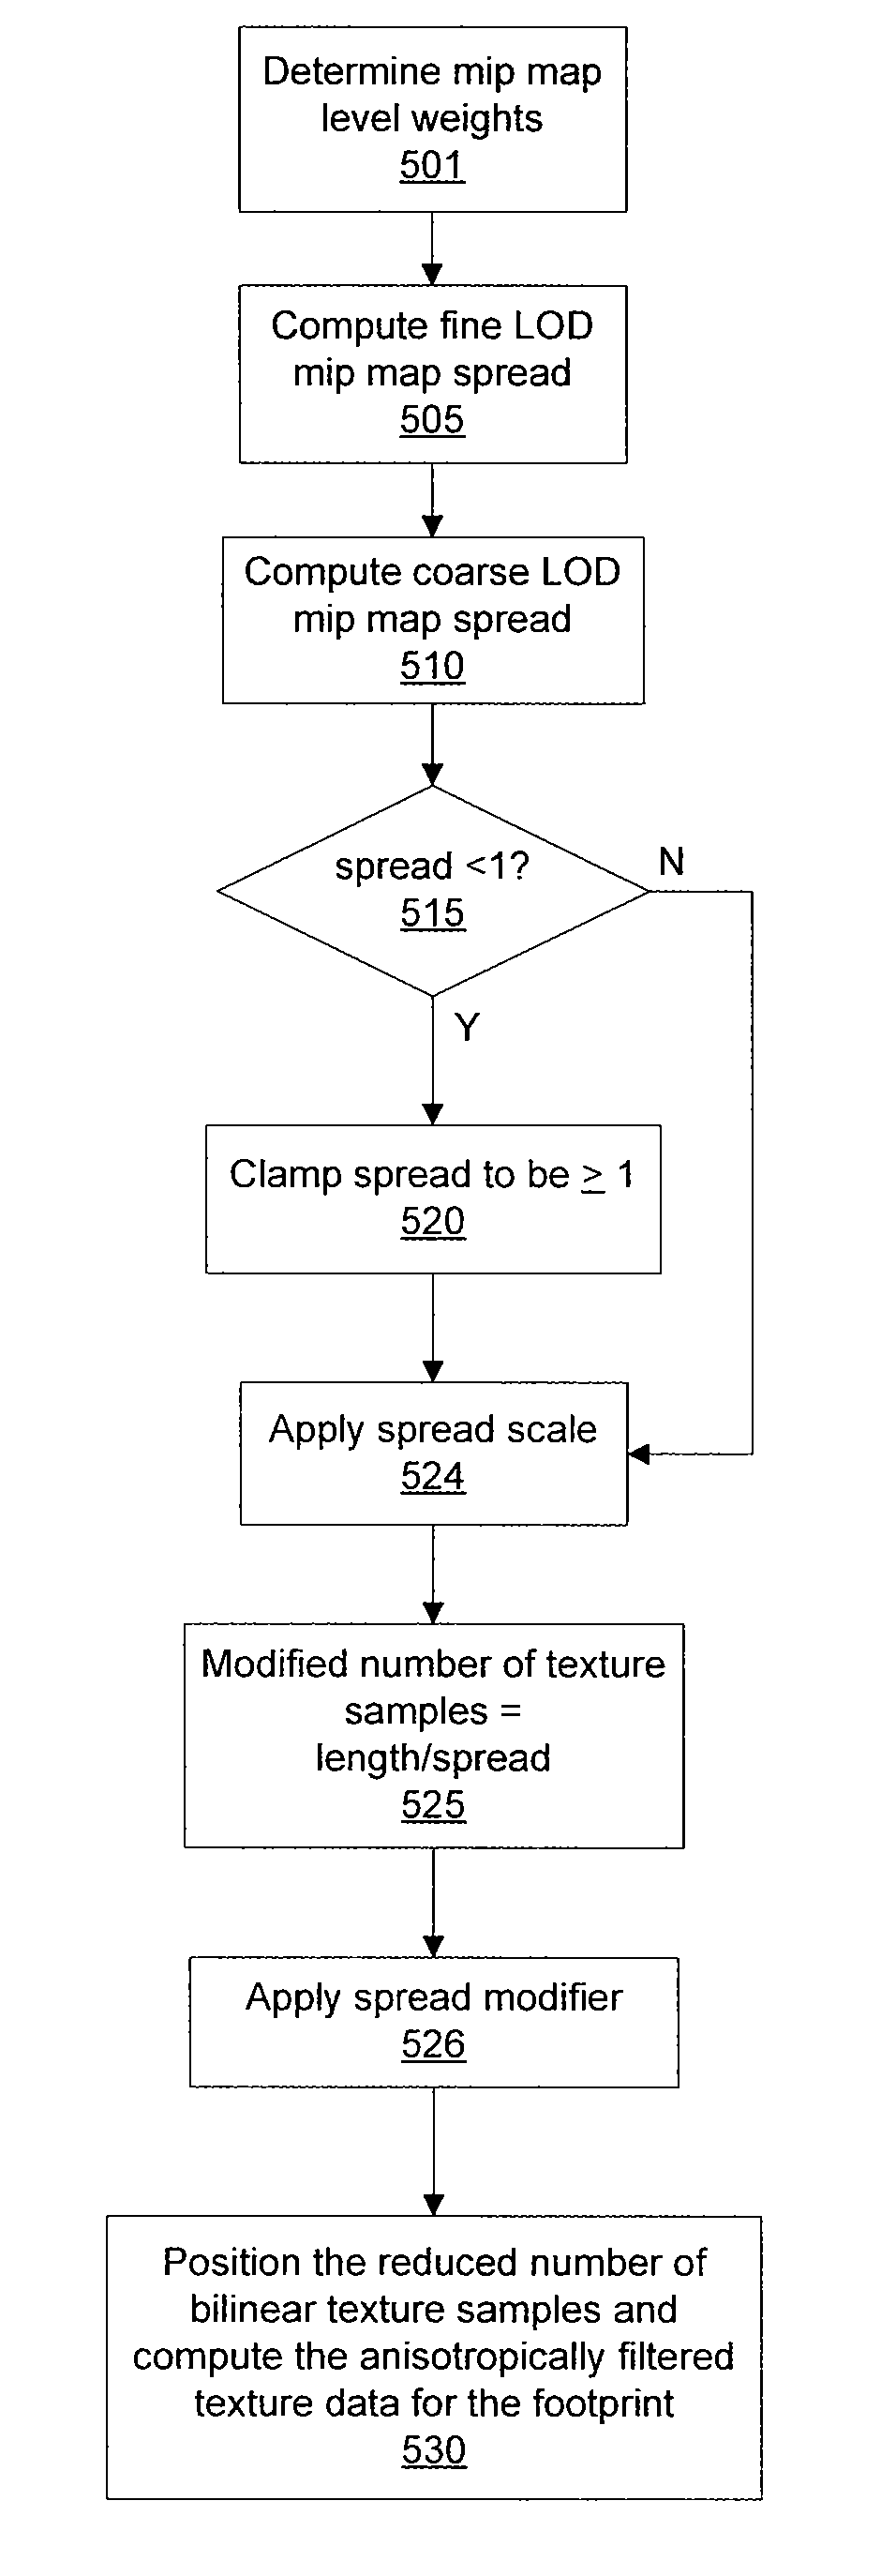 System and method for modifying a number of texture samples for anisotropic texture filtering